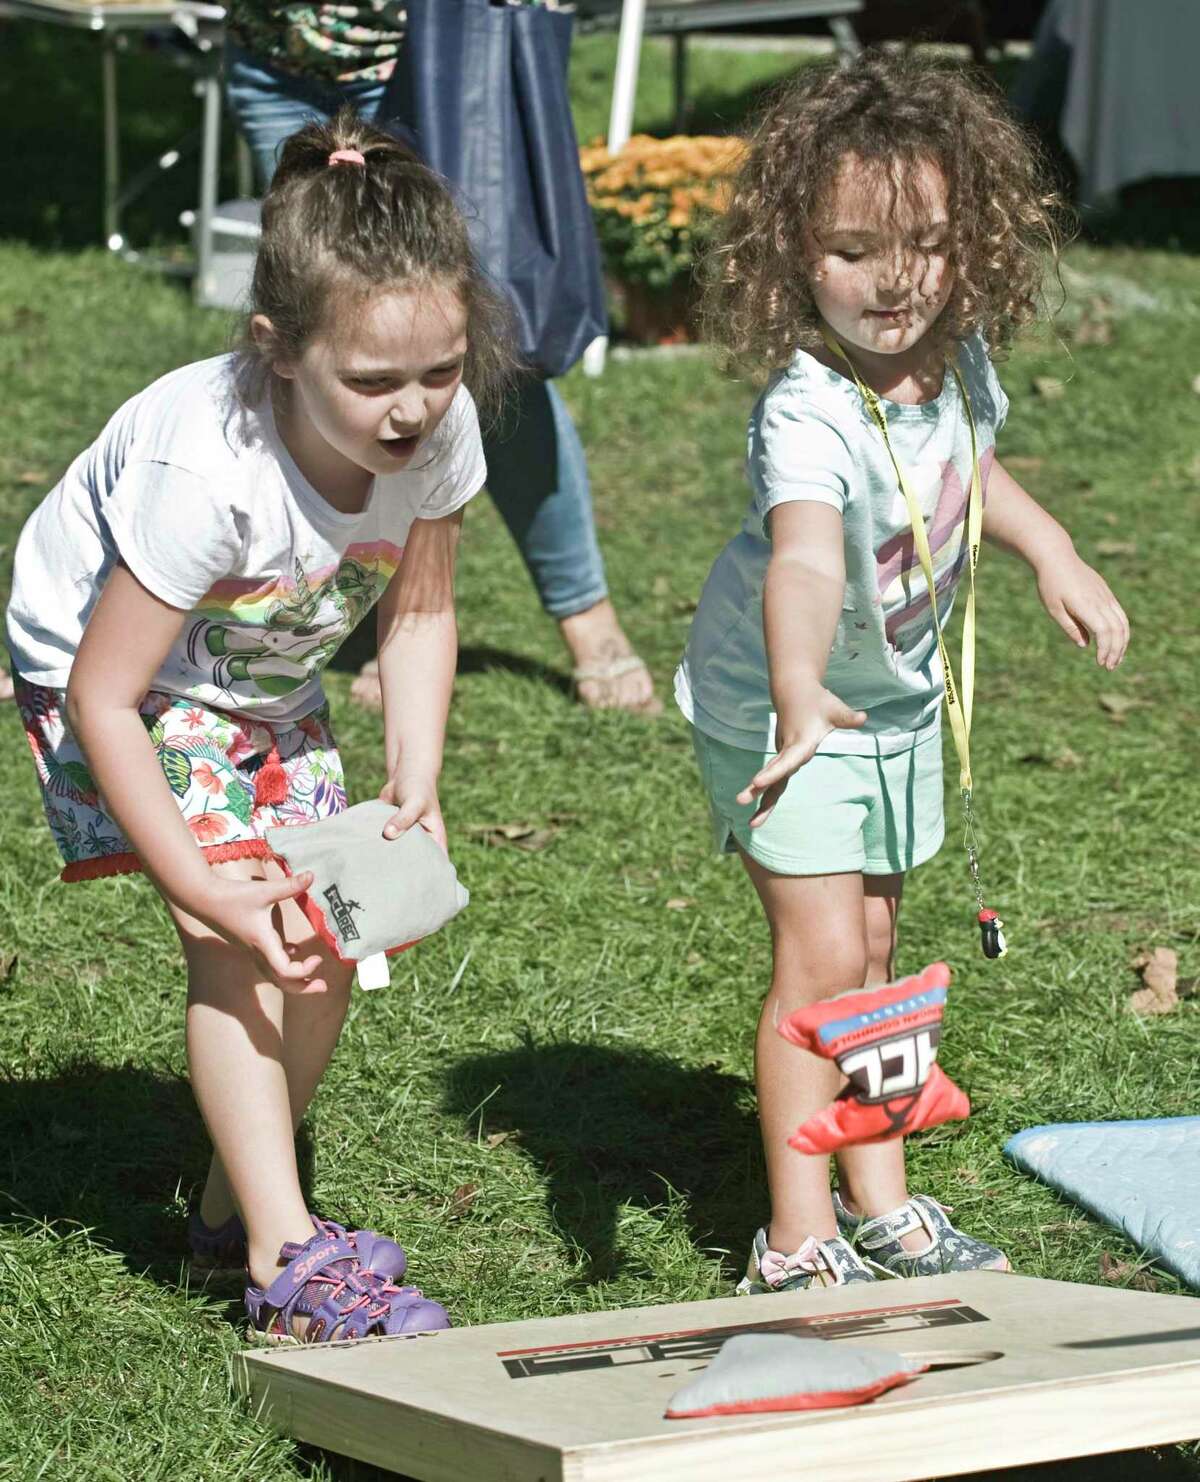 Taylor DeDiase, 6 of Brookfield, and her sister Remi, 4, doing the bean bag game at the Apple Festival on the New Milford town green. Saturday, Sept. 25, 2021